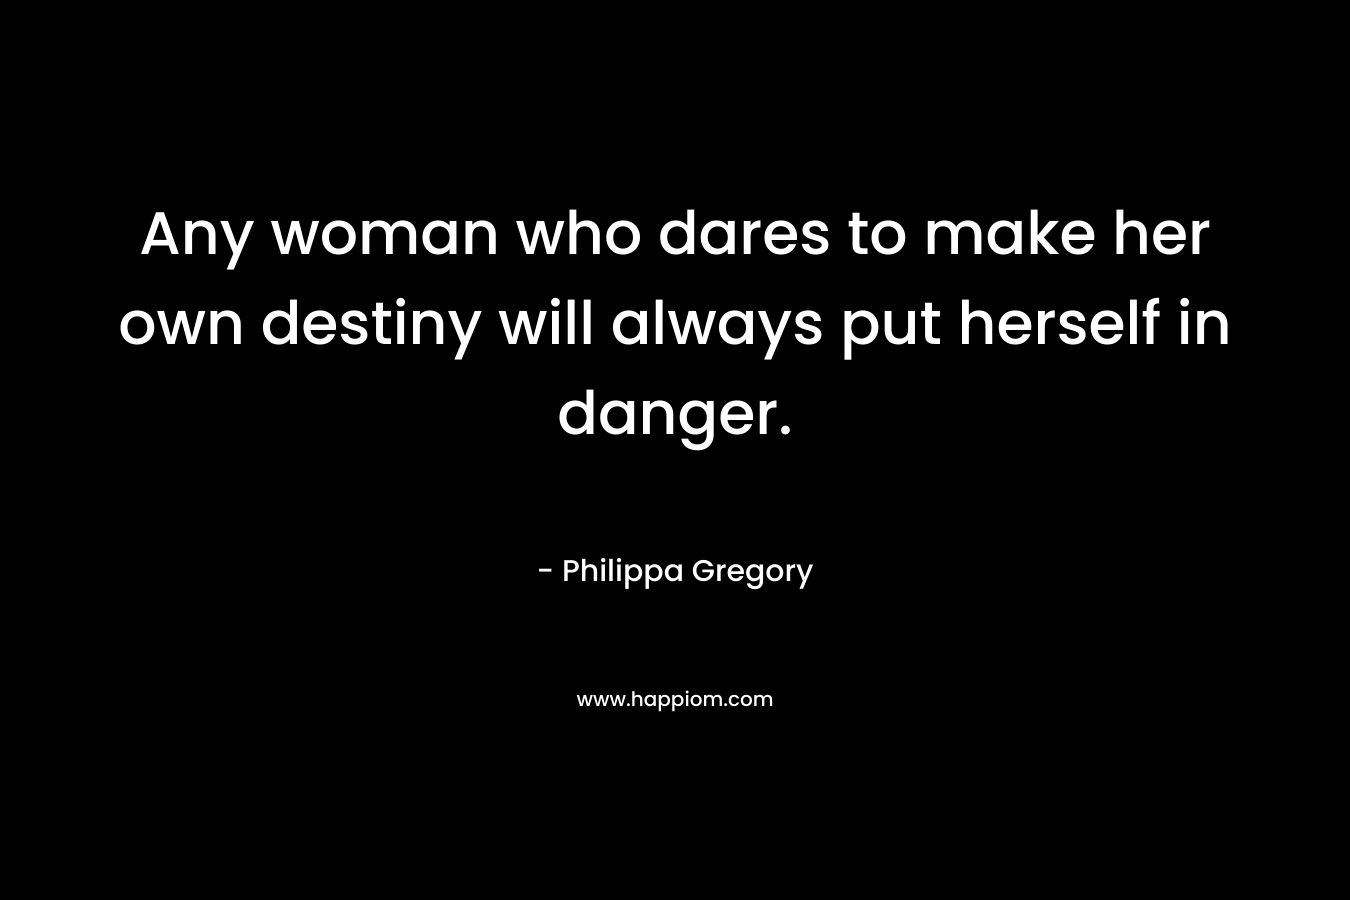 Any woman who dares to make her own destiny will always put herself in danger. – Philippa Gregory